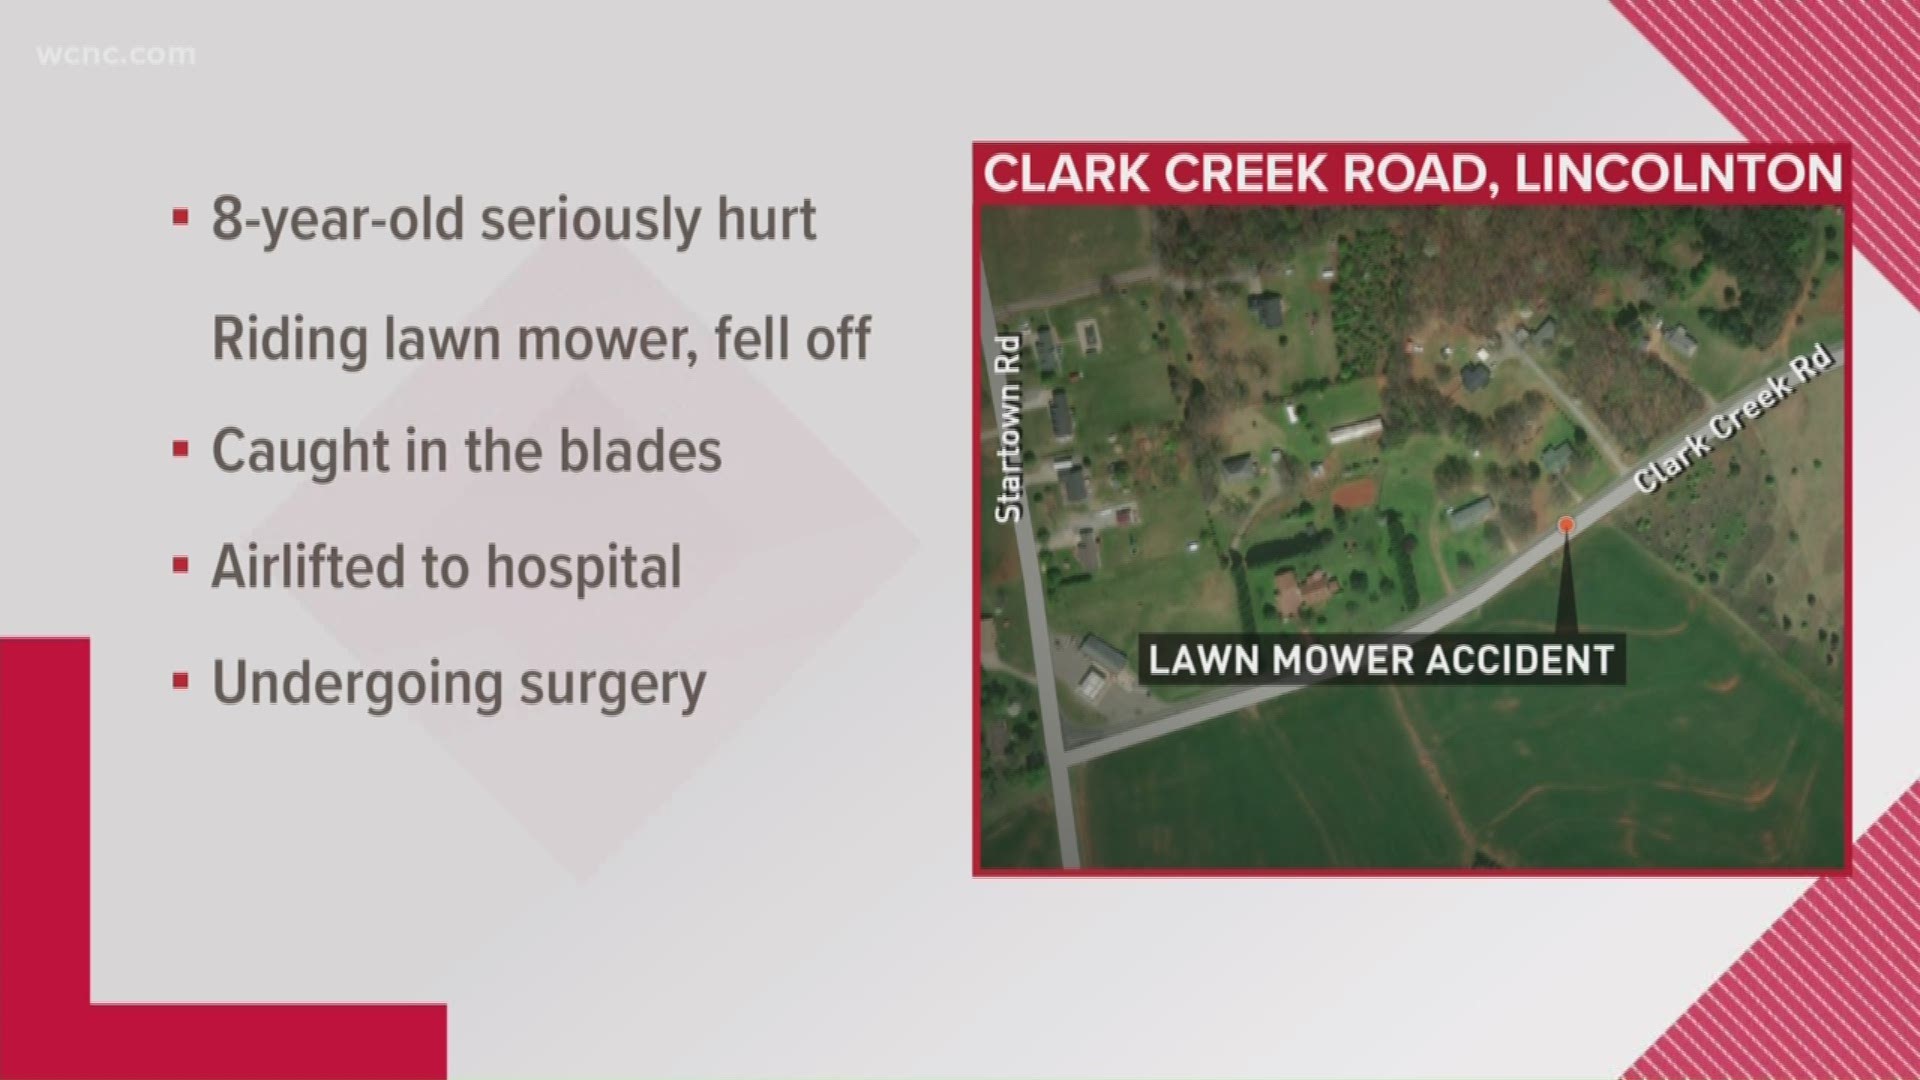 An 8-year-old boy has serious injuries after falling from a lawn mower, Lincoln County officials confirm. He was struck by the blades, which hit his left leg and both his arms.